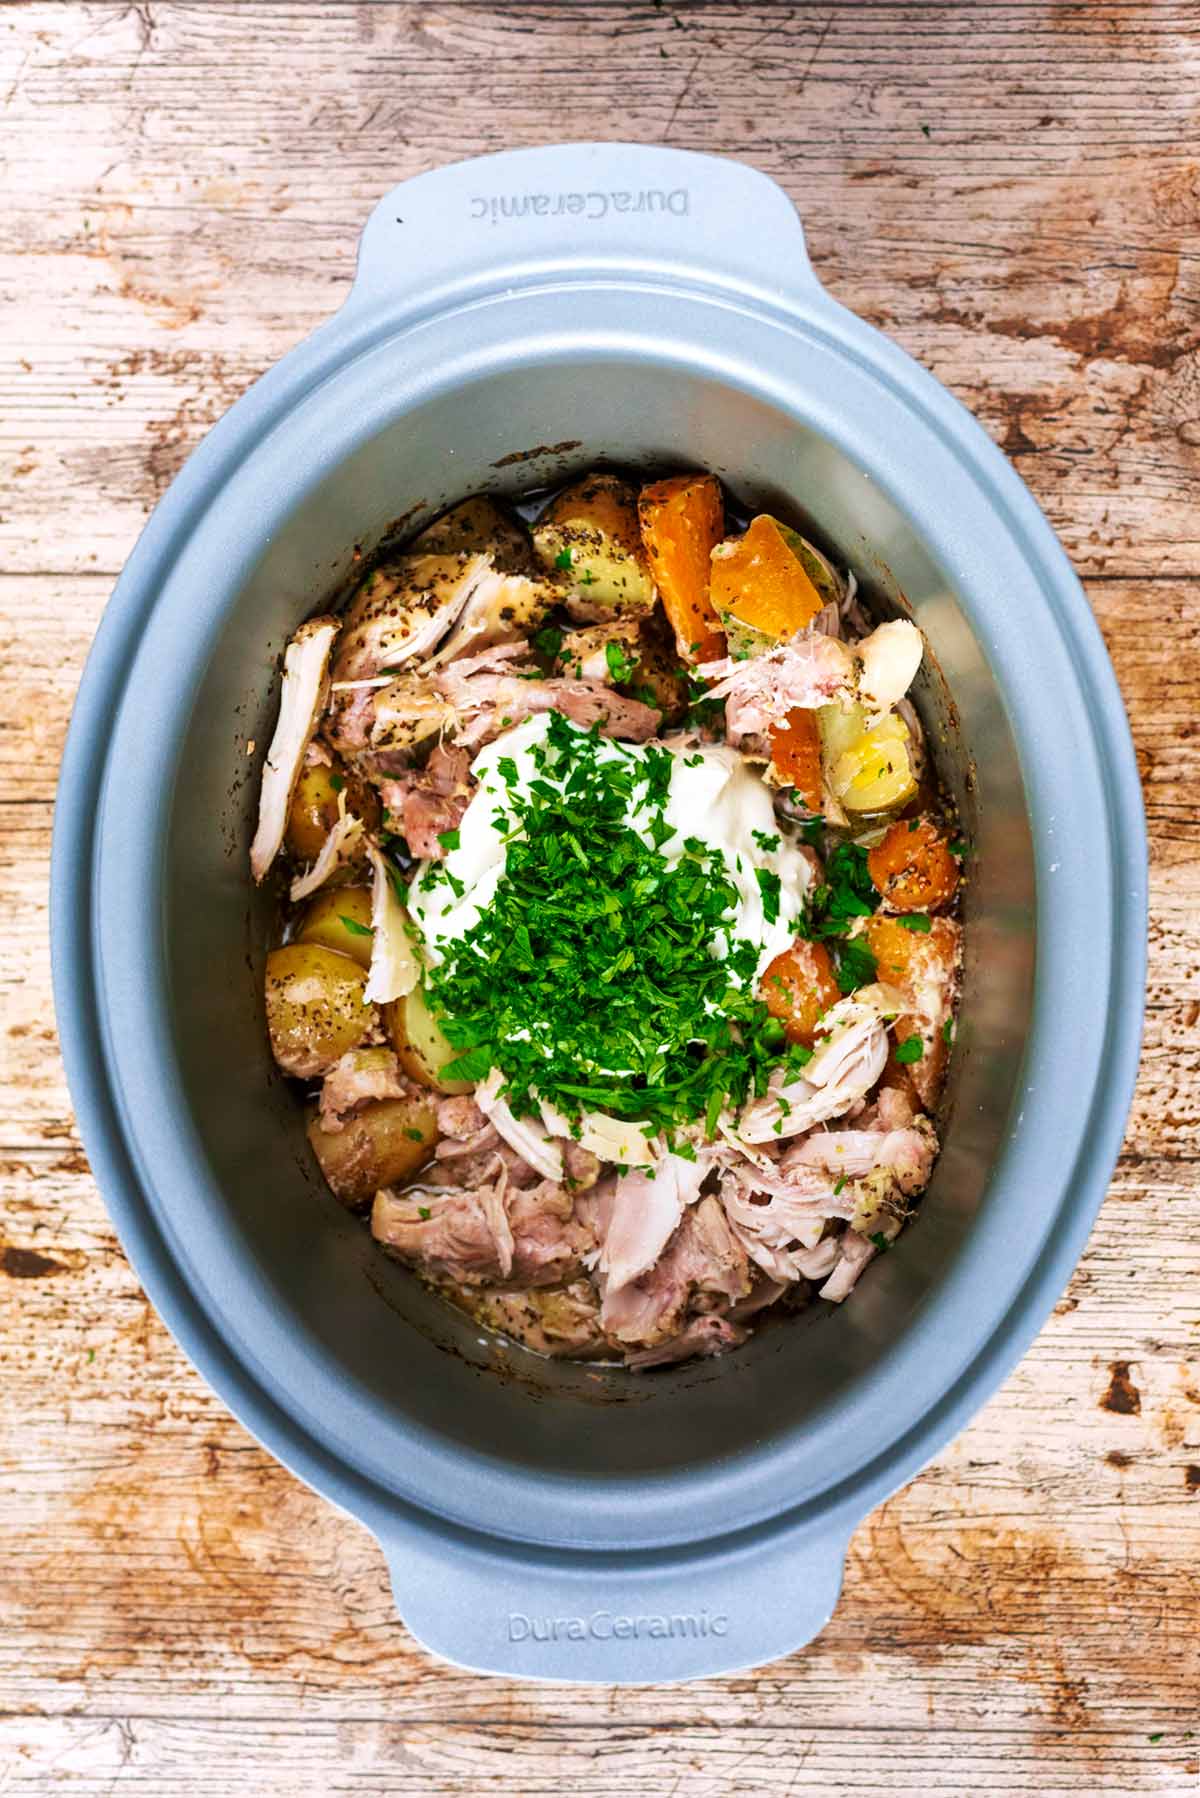 Shredded chicken, vegetables, cream and herbs in a slow cooker.